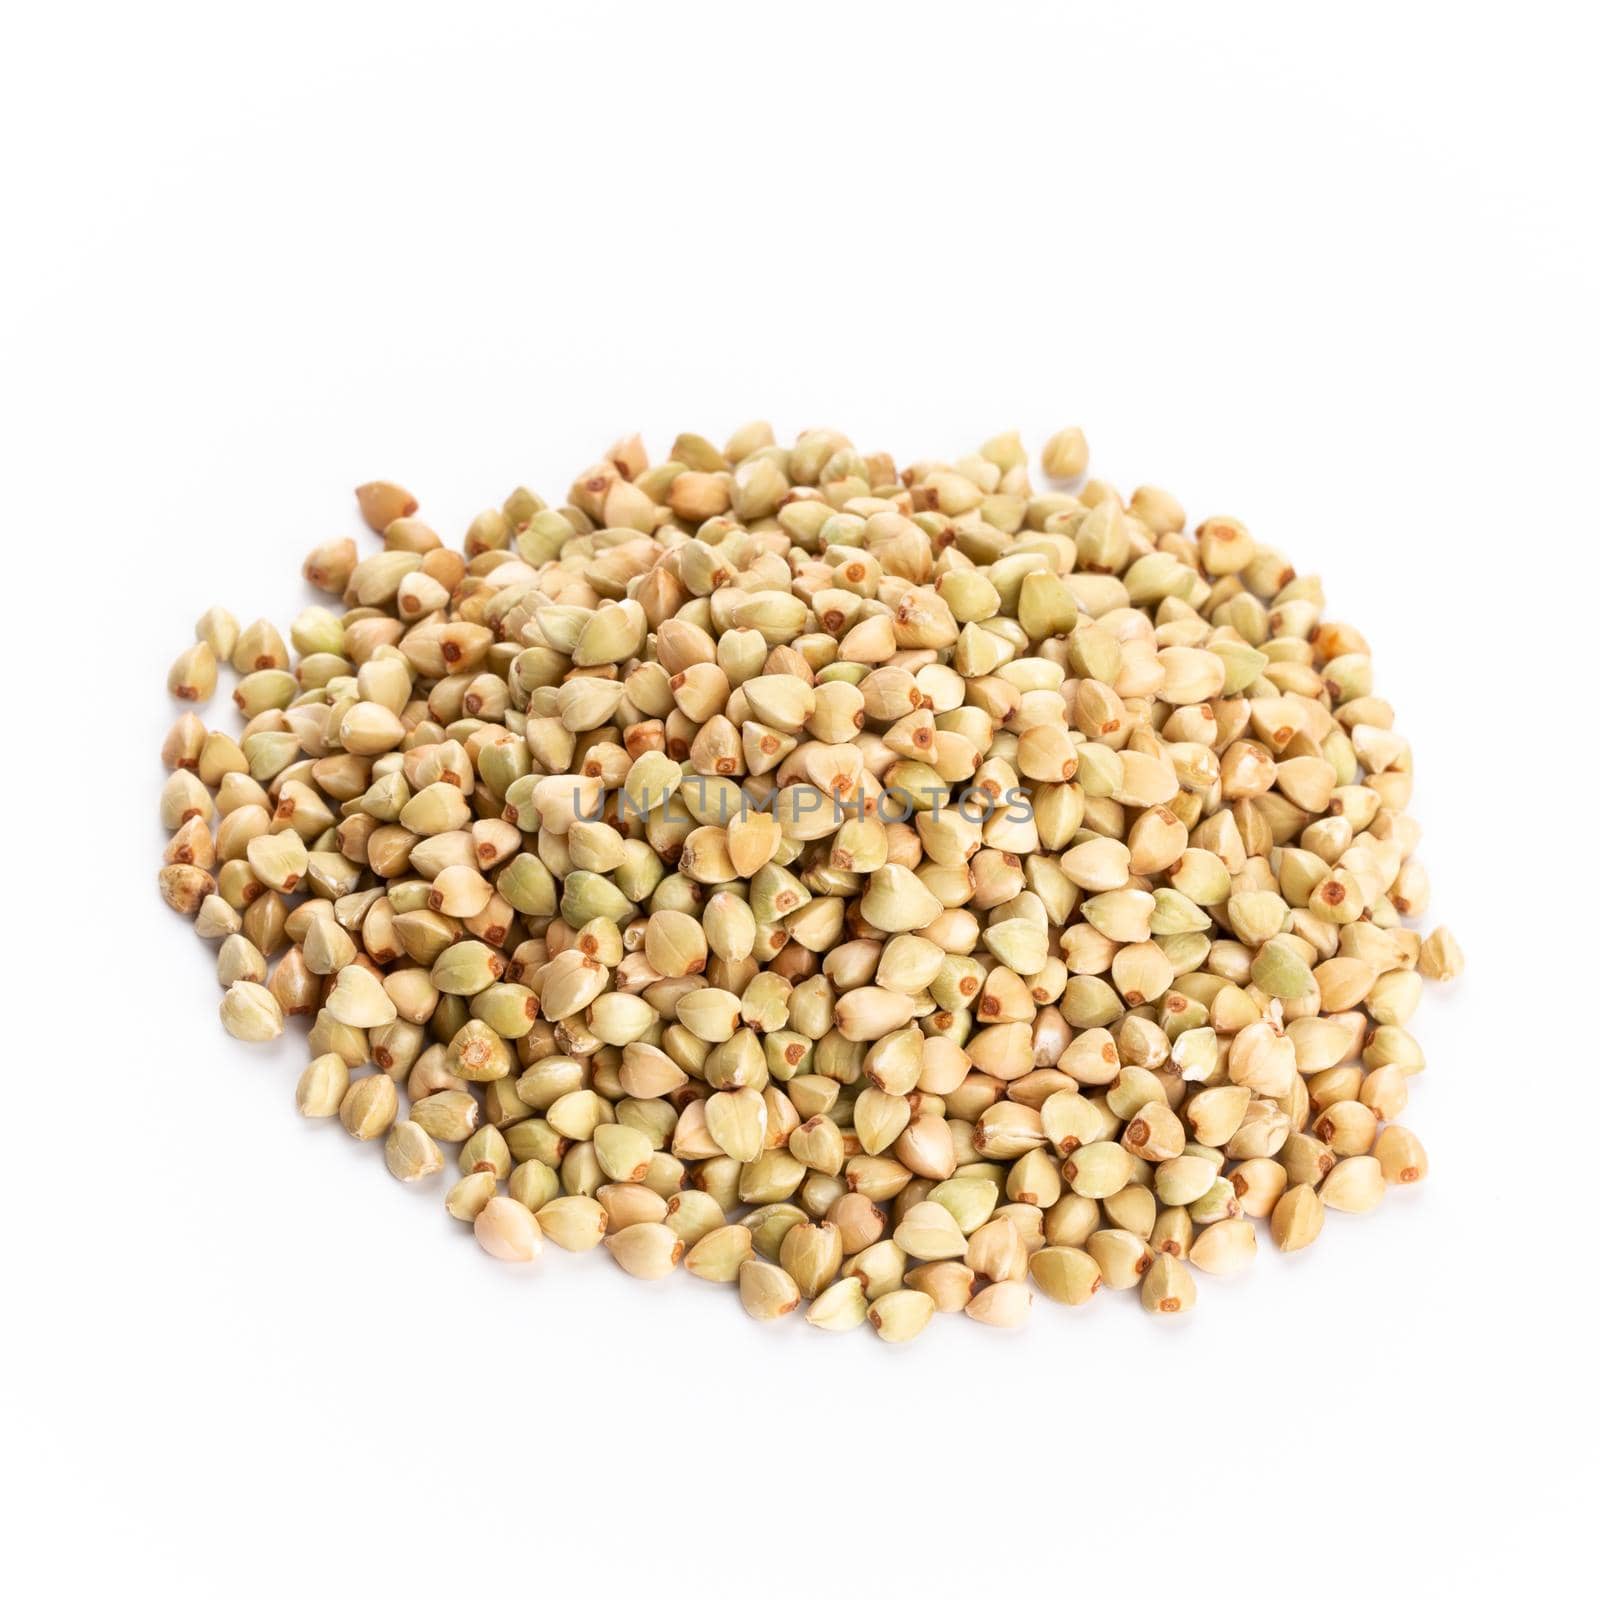 Heap of dried buckwheat seeds isolated on white background.